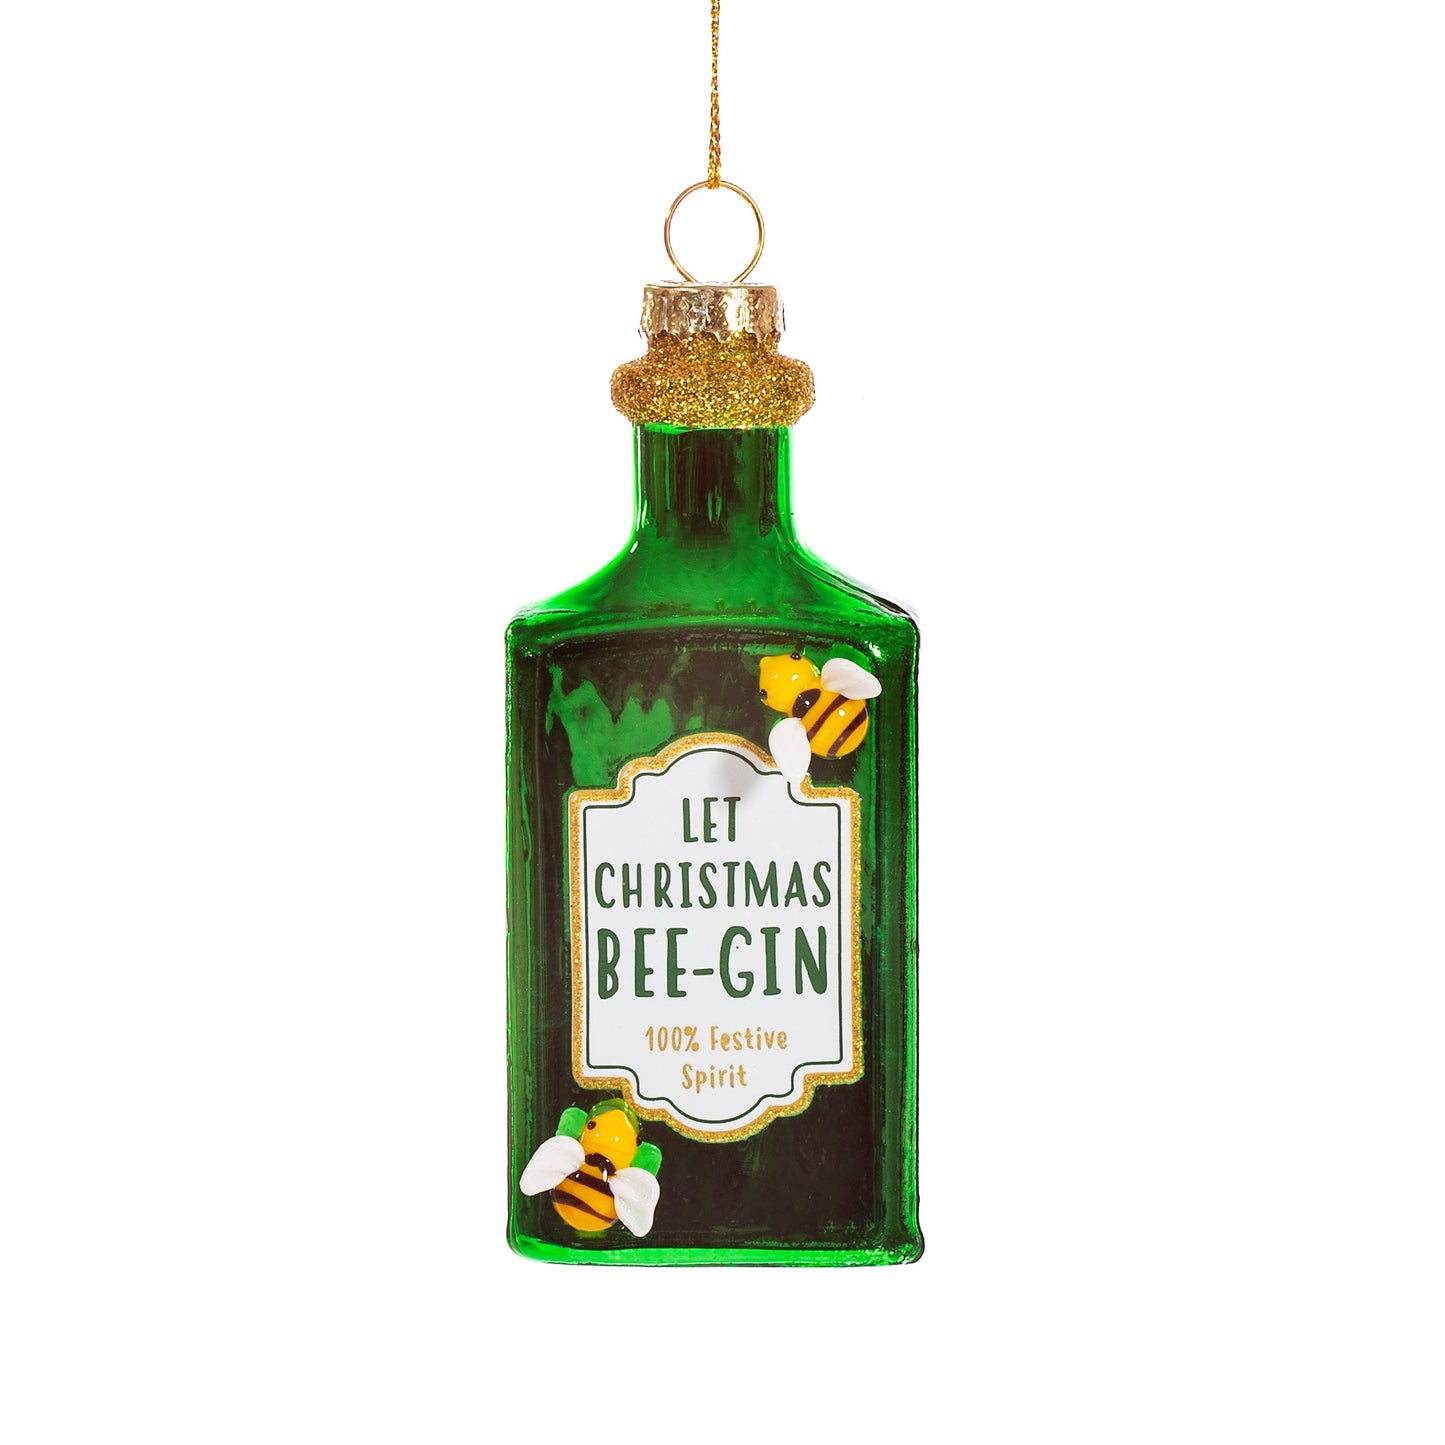 'Let Christmas Bee-Gin' Green Bottle Hanging Bauble